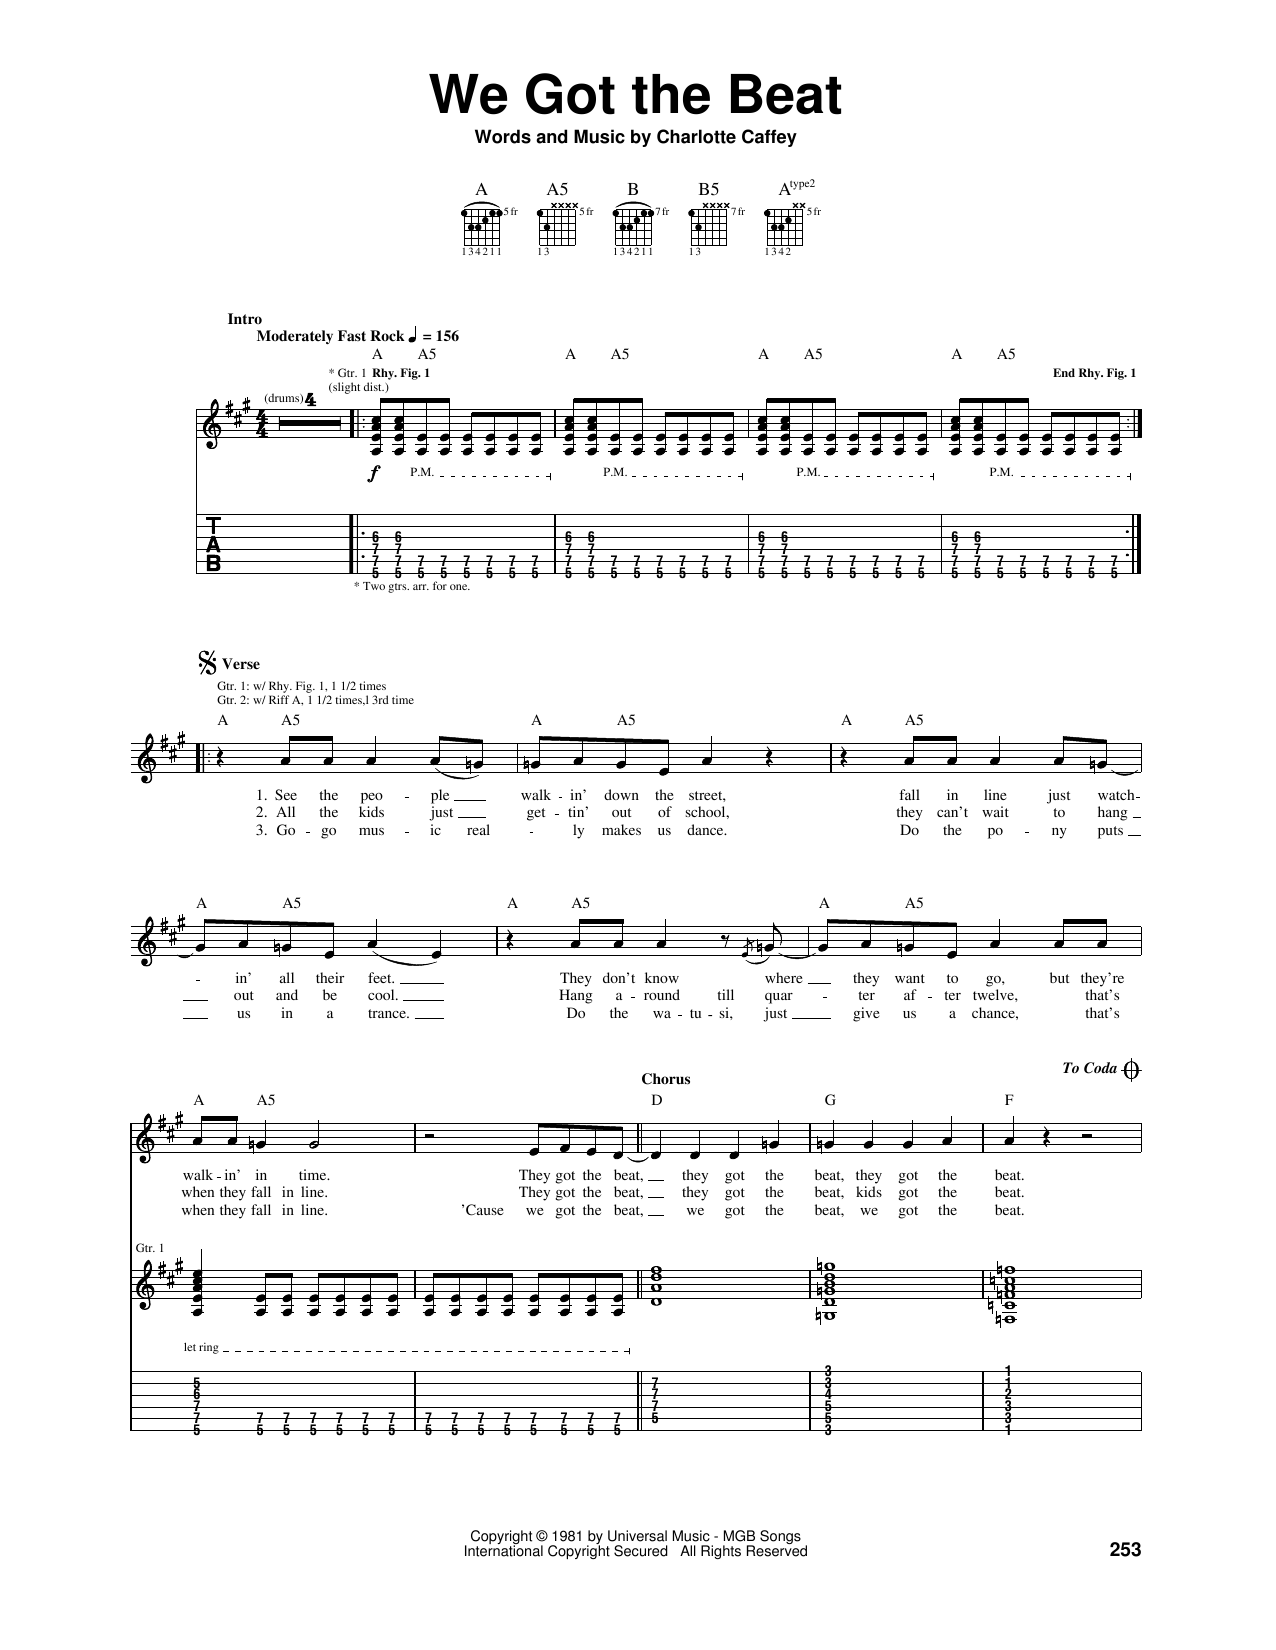 Download The Go Go's We Got The Beat Sheet Music